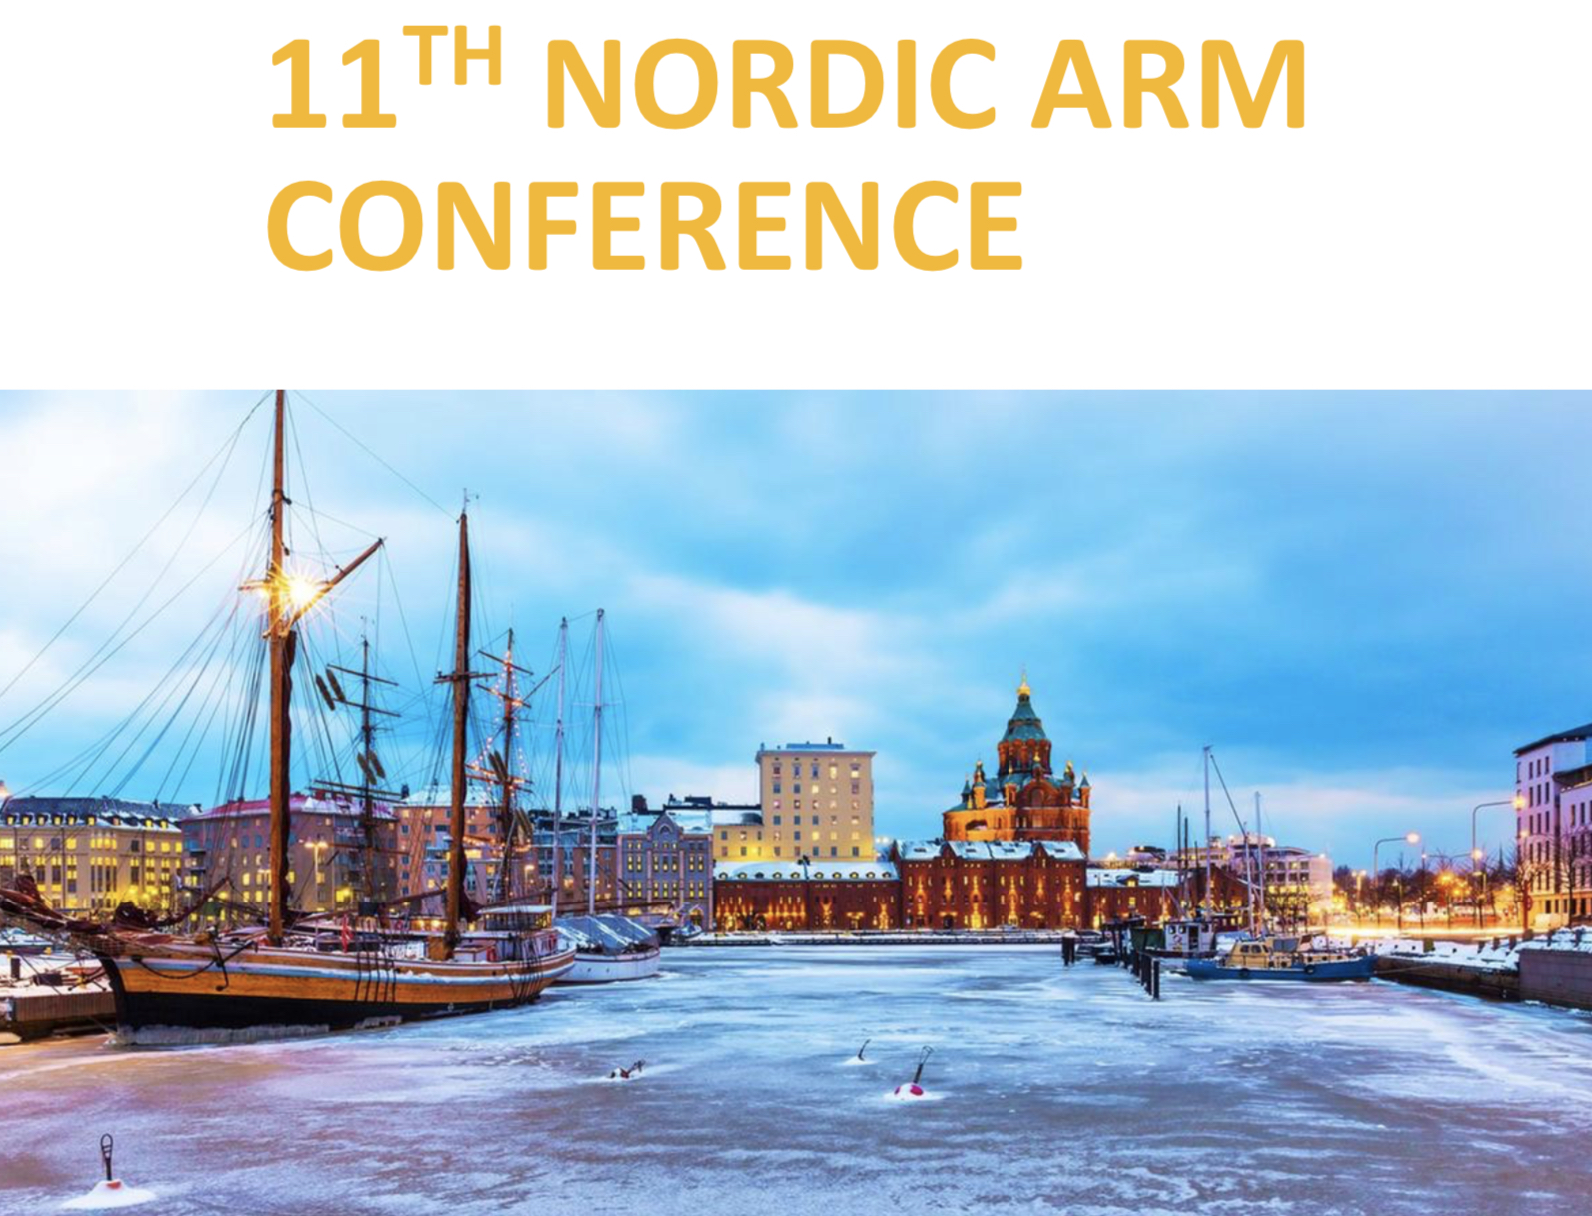 11th Nordic ARM Conference 4th and 5th of February 2020 Helsinki Airport, Finland